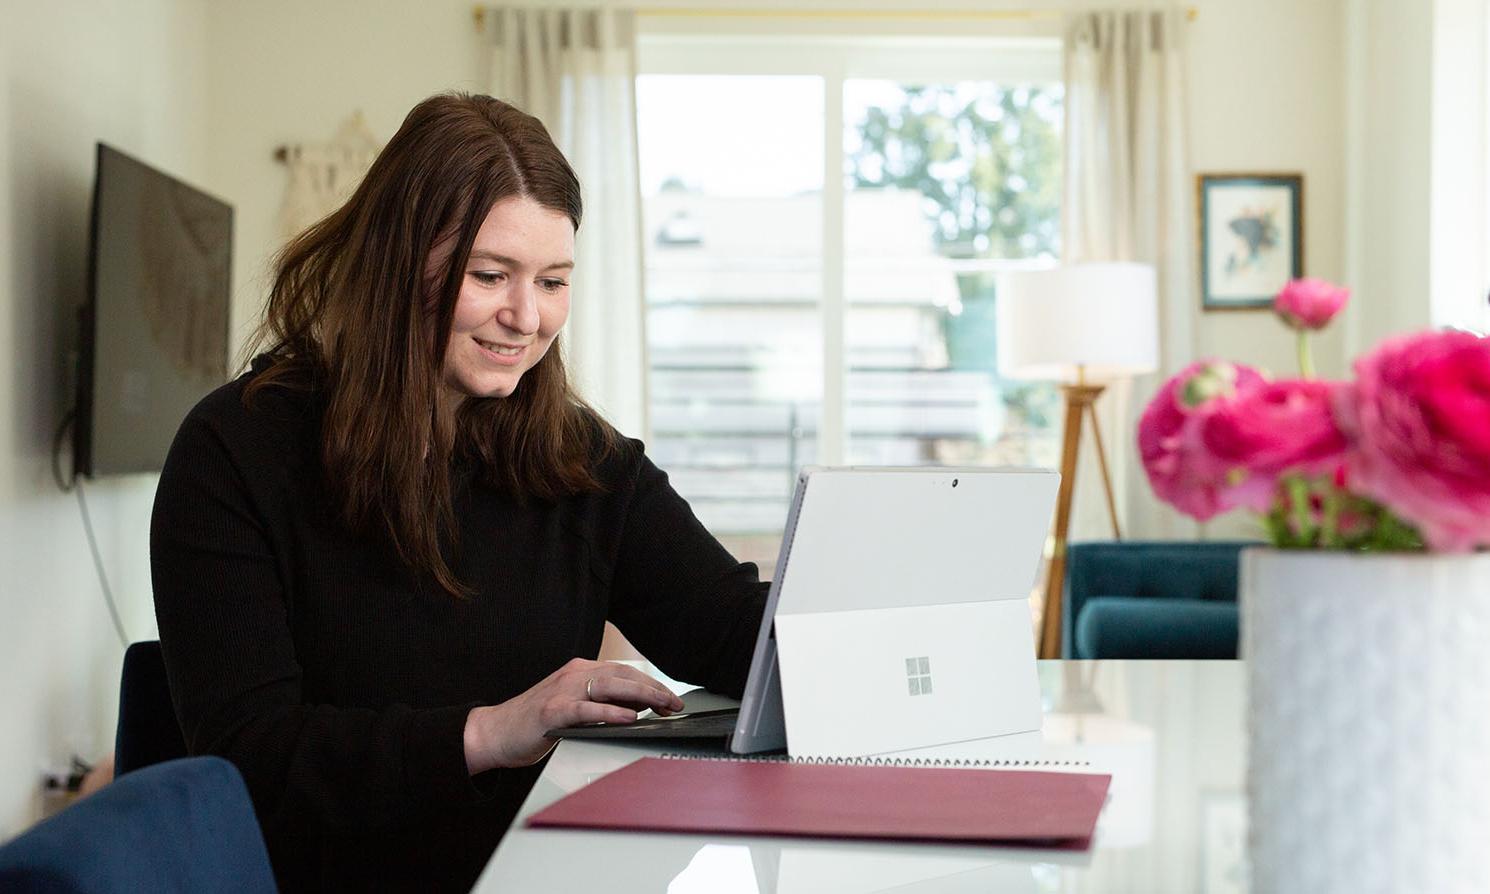 An MBA student works on her laptop at home | photo by Chris Baron